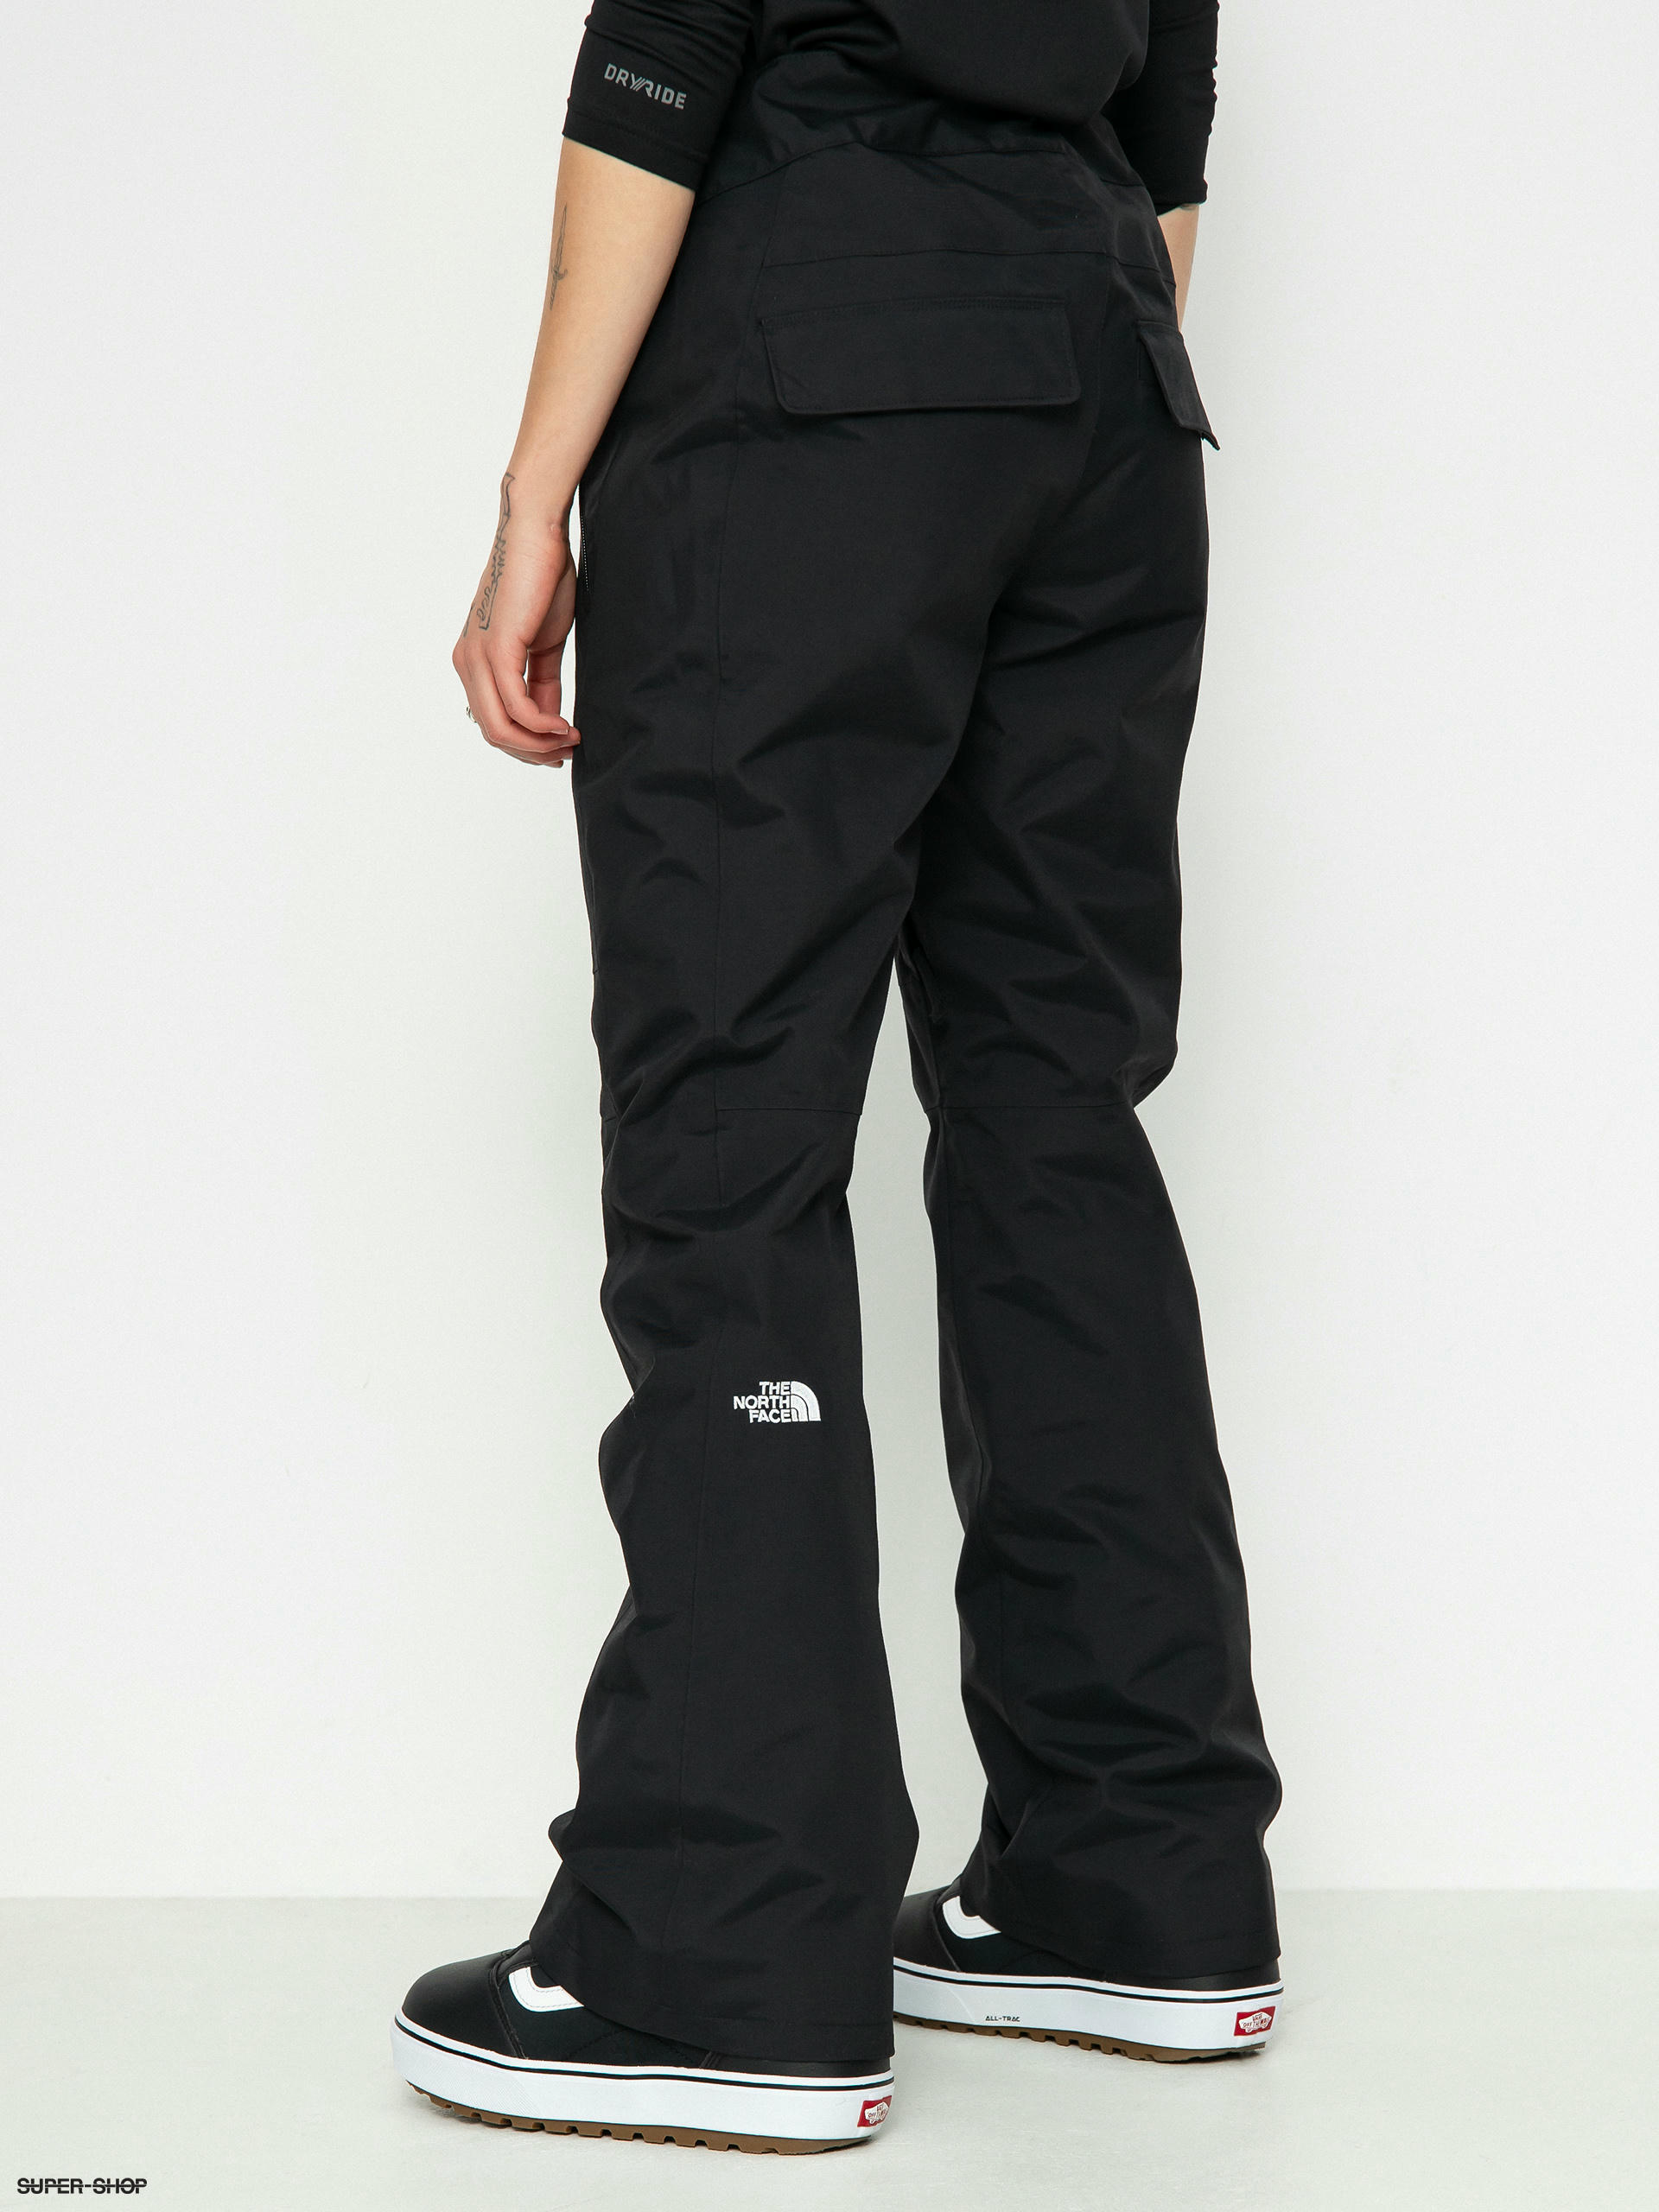 Womens The North Face Aboutaday Snowboard pants (tnf black)